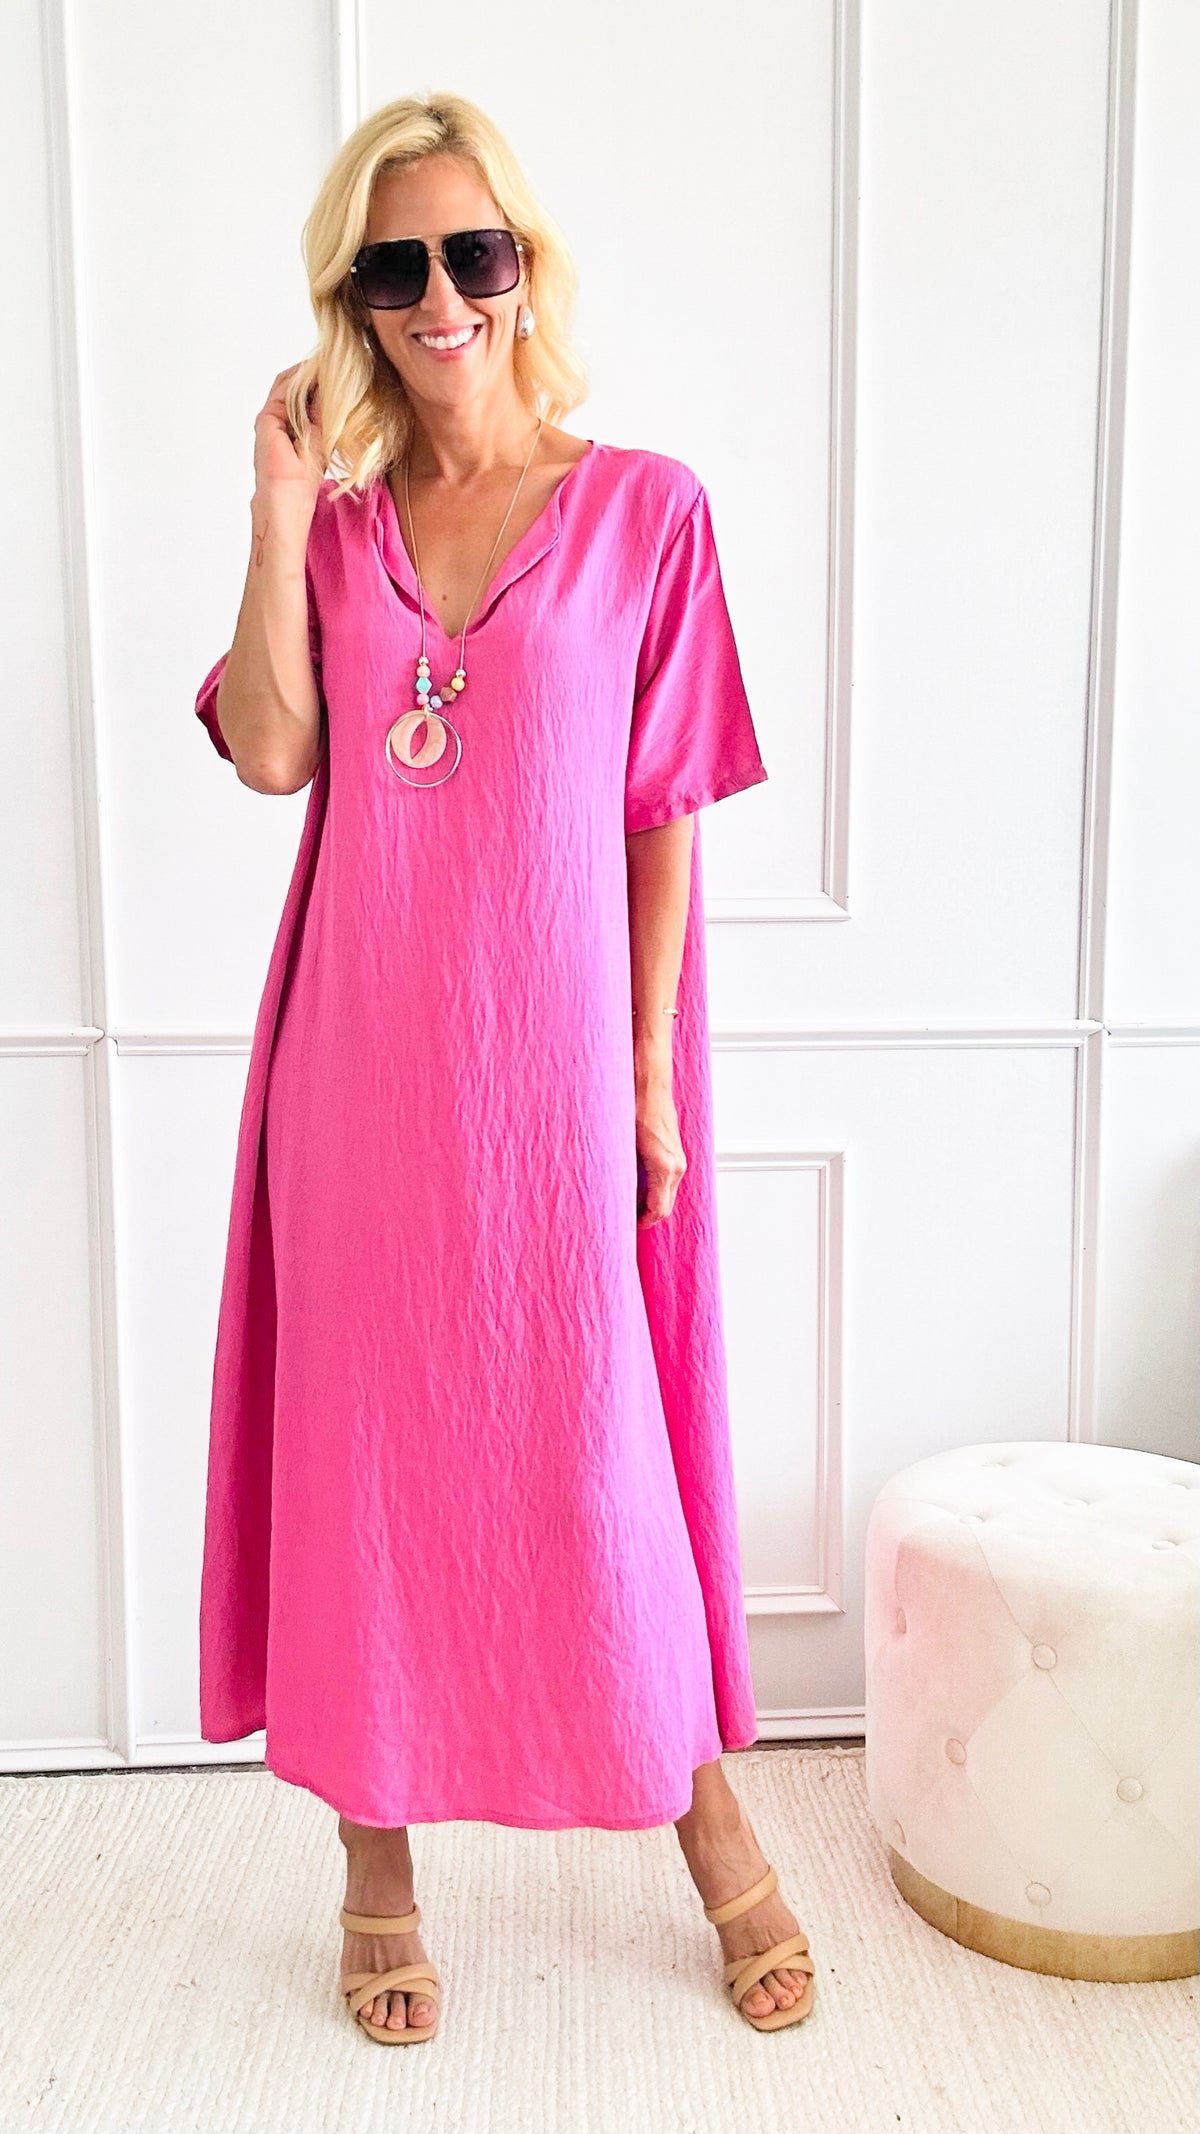 Linen Italian Dress W/Necklace - Fuchsia-200 dresses/jumpsuits/rompers-Germany-Coastal Bloom Boutique, find the trendiest versions of the popular styles and looks Located in Indialantic, FL